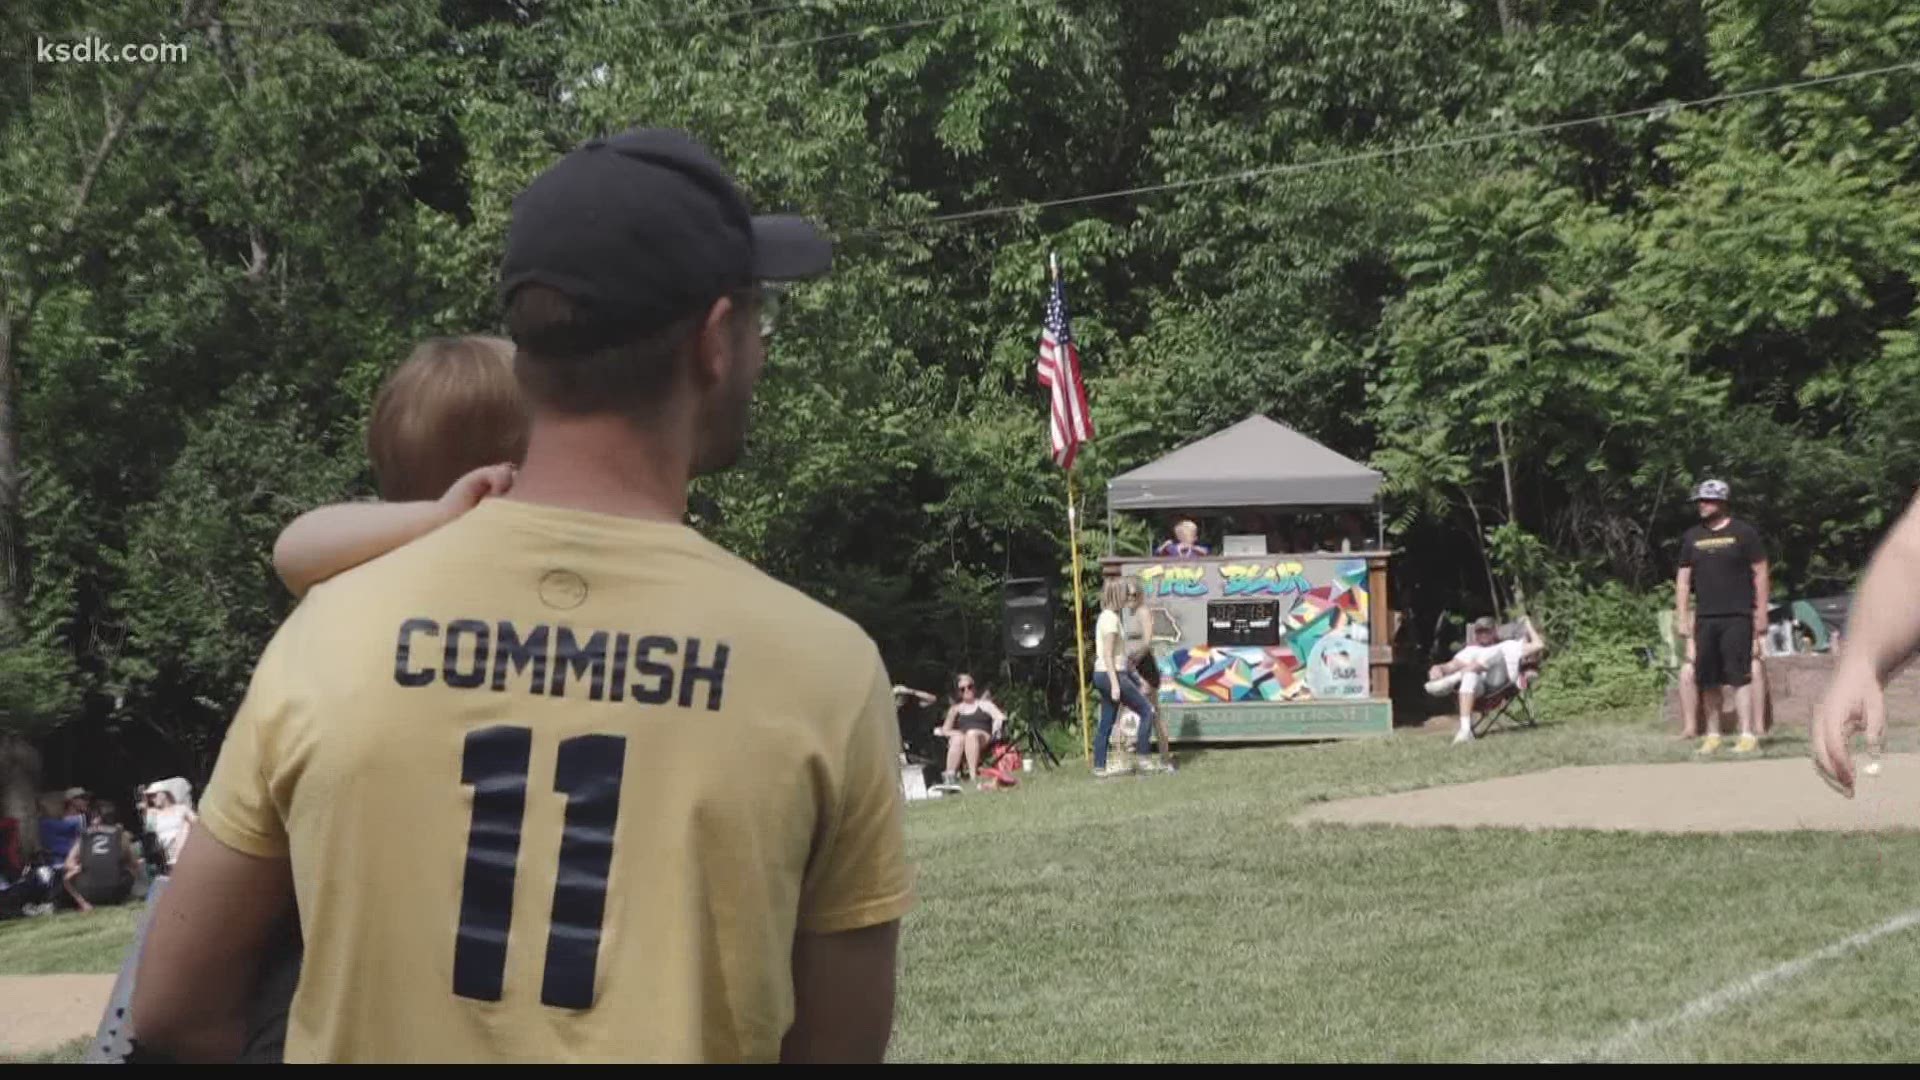 What began 19 seasons ago as a summer-long league between classmates has turned into a four-day weekend wiffleball marathon. And they have thought of every detail